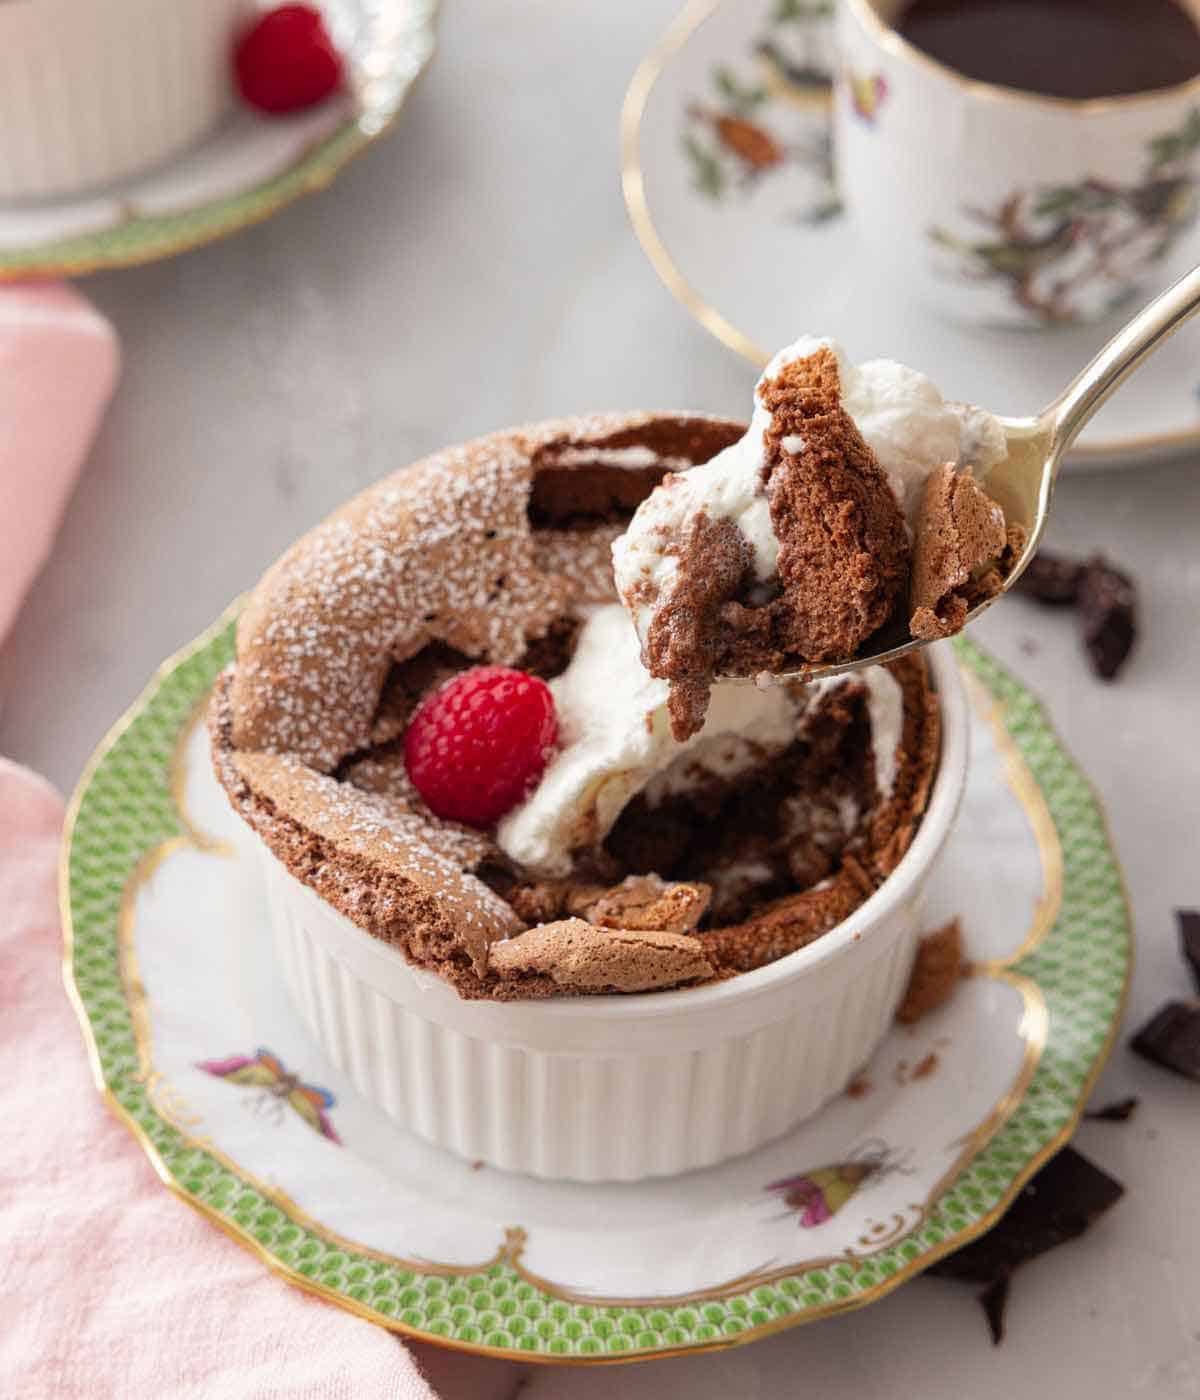 A spoonful of chocolate souffle lifted from a ramekin with a raspberry on top.